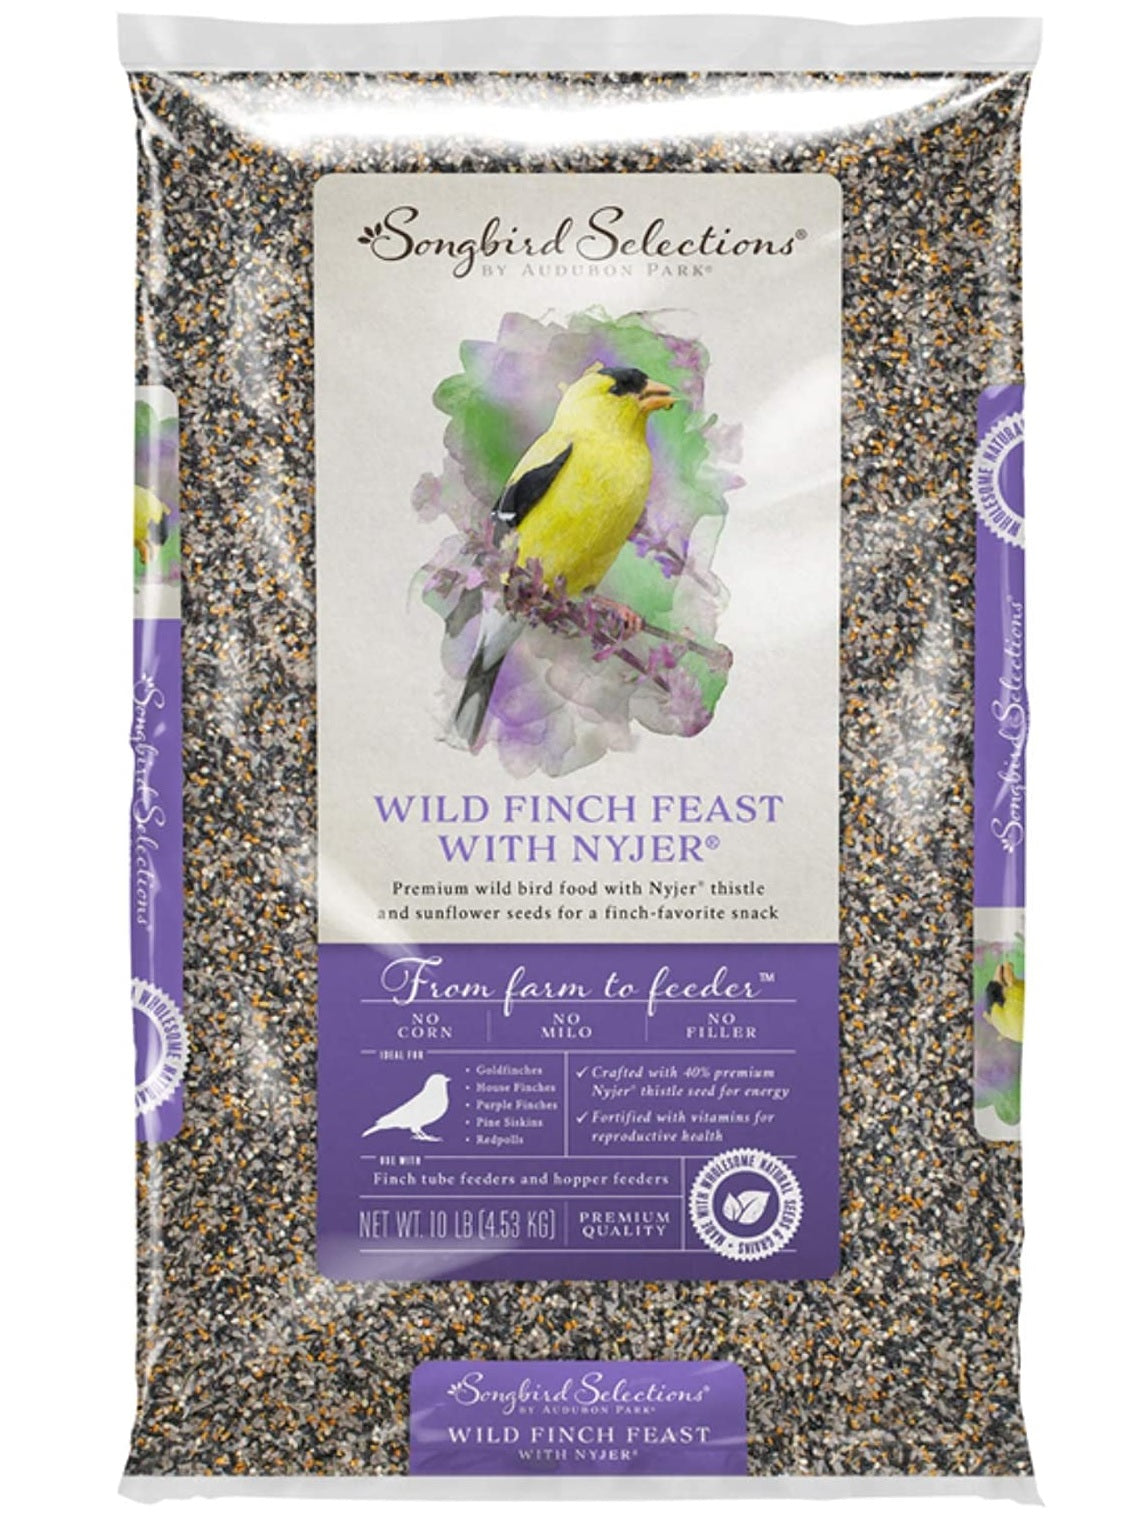 Songbird Selections 13634 Wild Finch Feast with Nyjer Wild Bird Food, 10 Lbs